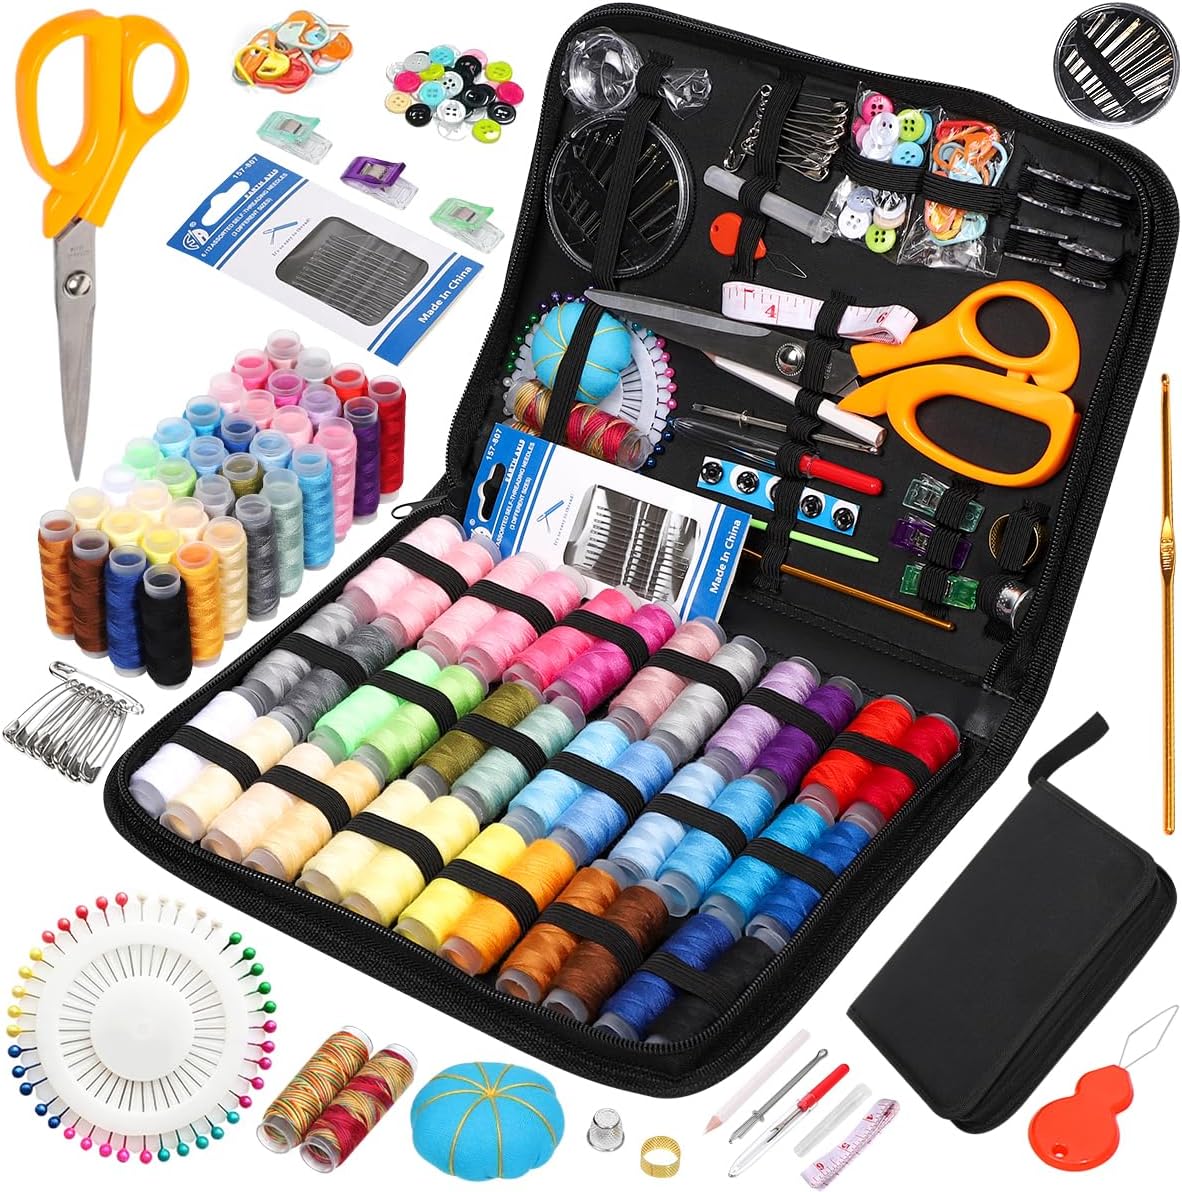 Sewing Kit with Case, Sewing Supplies for Home Travel and Emergency, Kids Machine, Contains Spools of Thread, Mending and Sewing Needles, Scissors, Thimble, Tape Measure